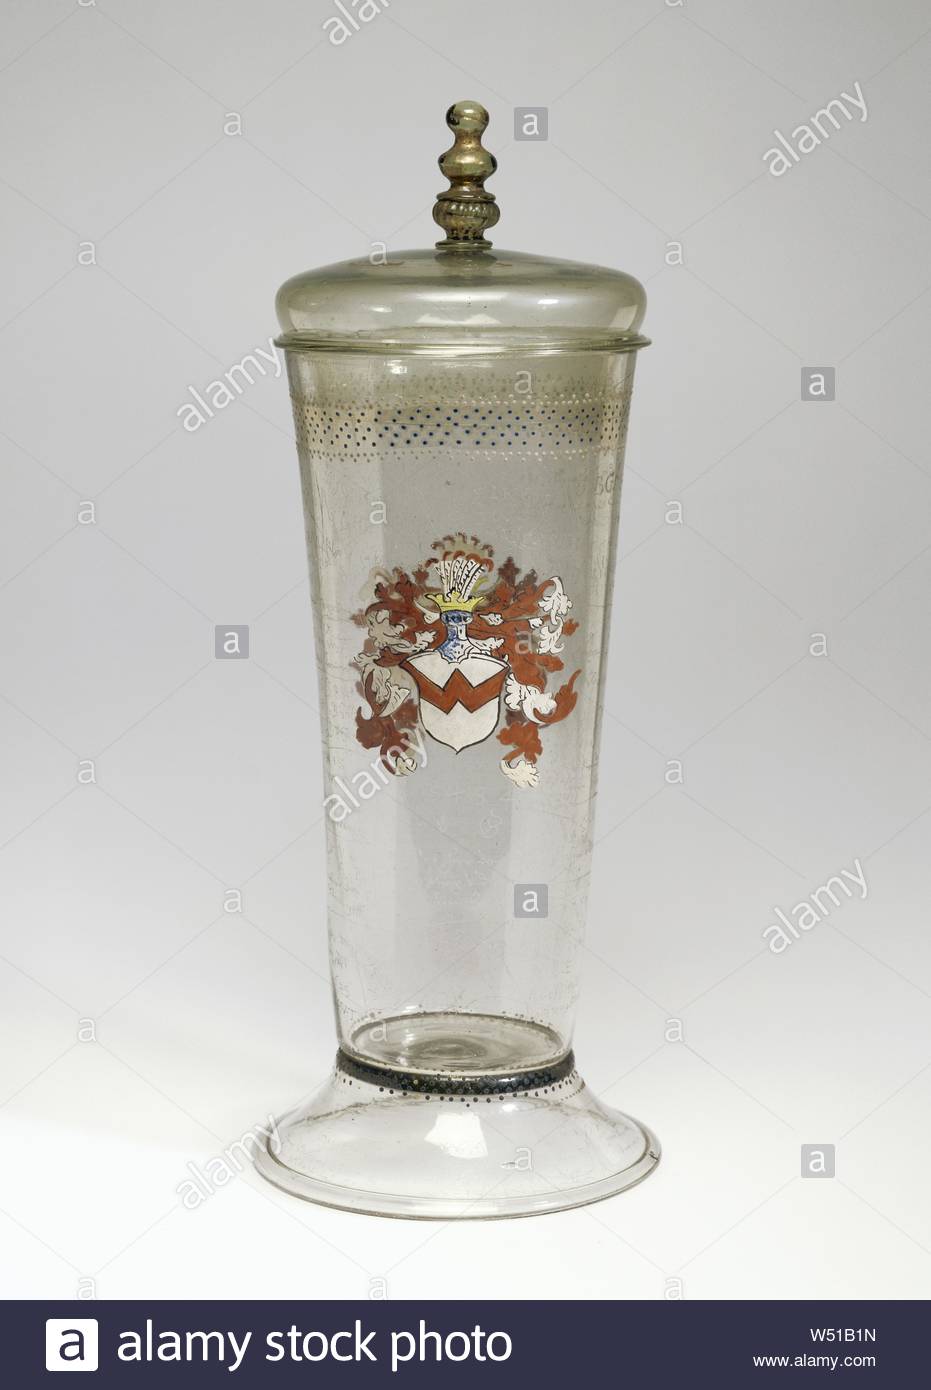 covered wel e beaker wilkommglas unknown maker faon de venise possibly the glashtte of sebastian hchstetter austrian active 1540 1569 hall austria 1550 1554 free blown colorless slightly gray glass with diamond point engraving gilding and enamel decoration 37 cm 14 916 in W51B1N